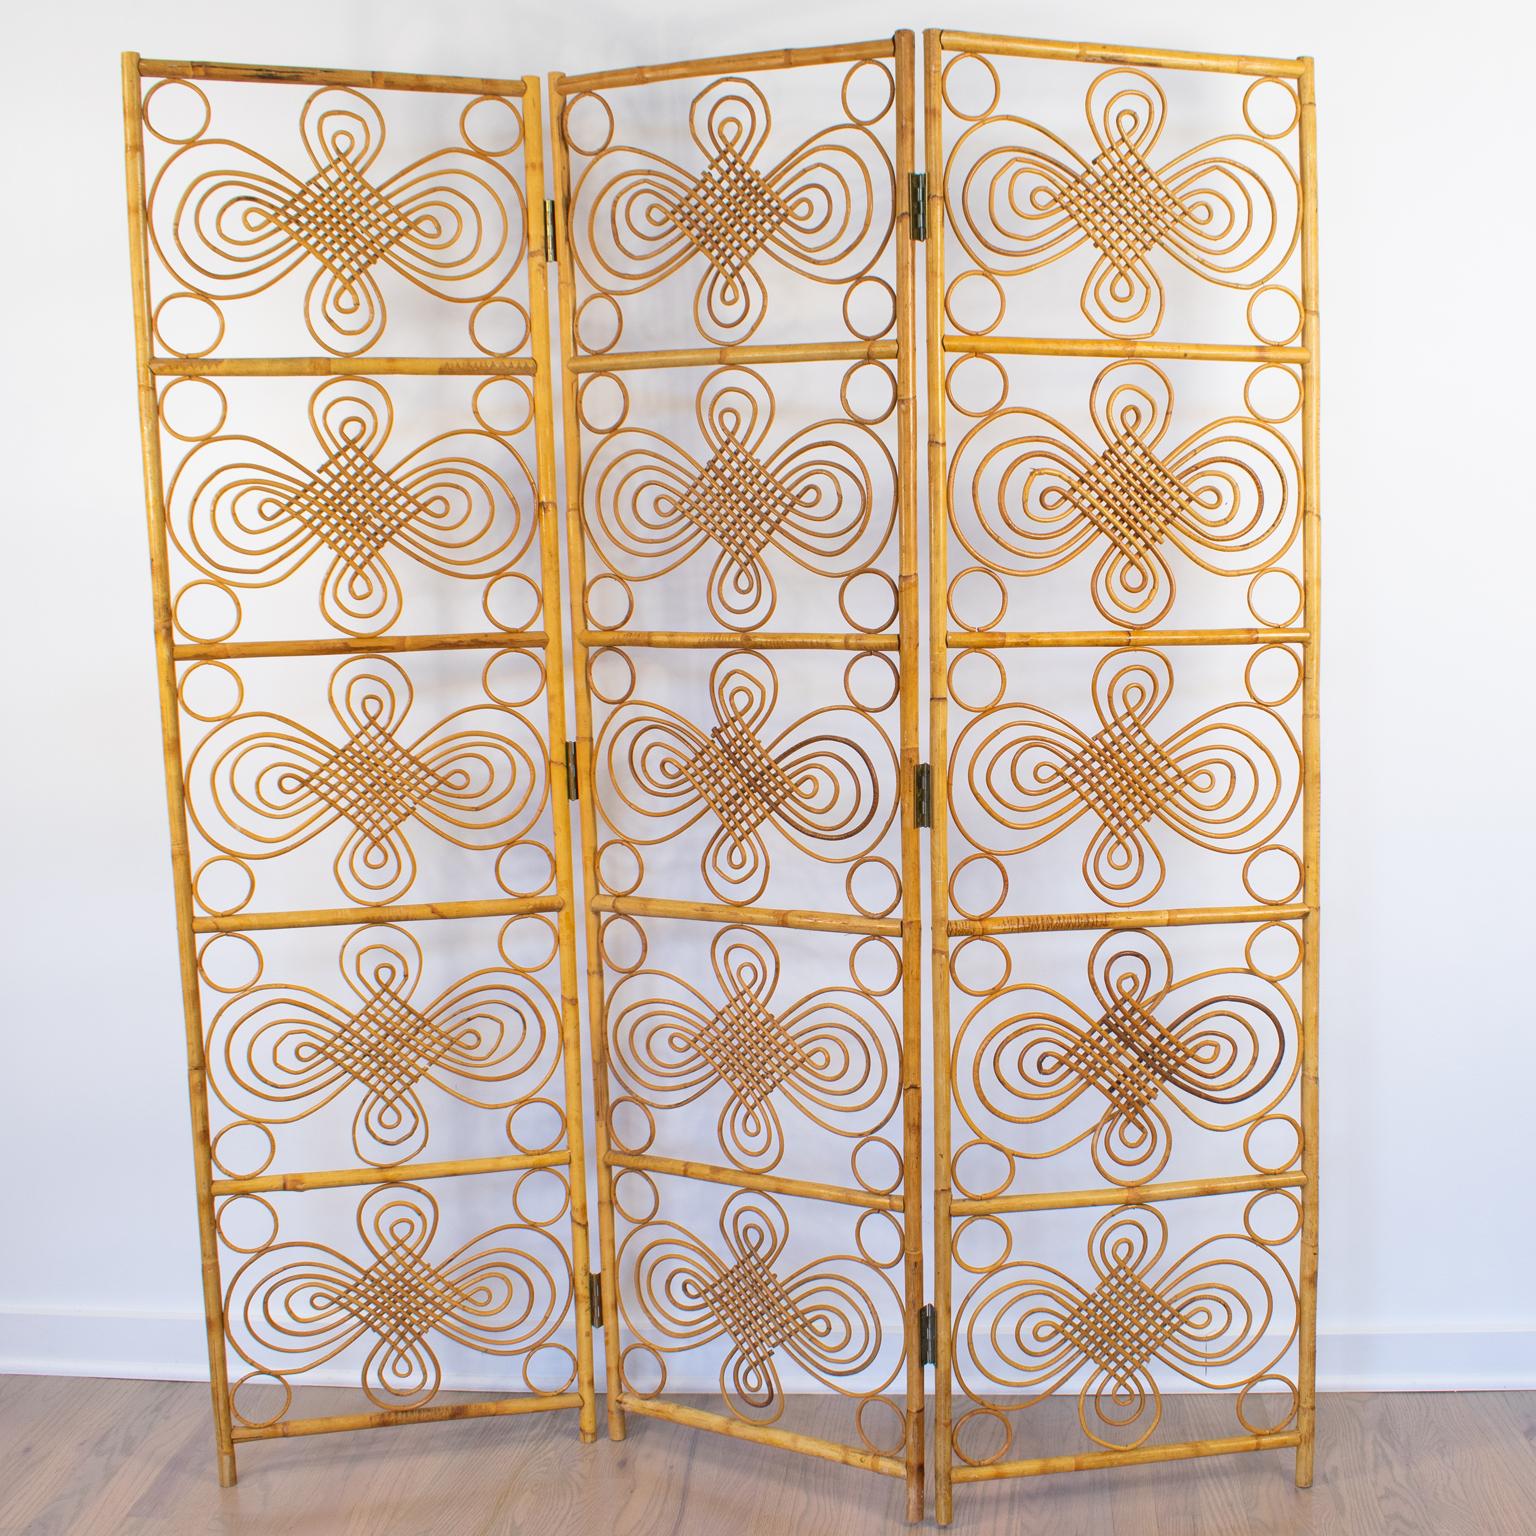 Hand-crafted in France in the 1960s, this striking rattan or wicker and bamboo three-panel room divider boasts a typical Mid-century filigree decoration. This rattan screen features mid-century and chinoiserie accents, circular ornaments, and a